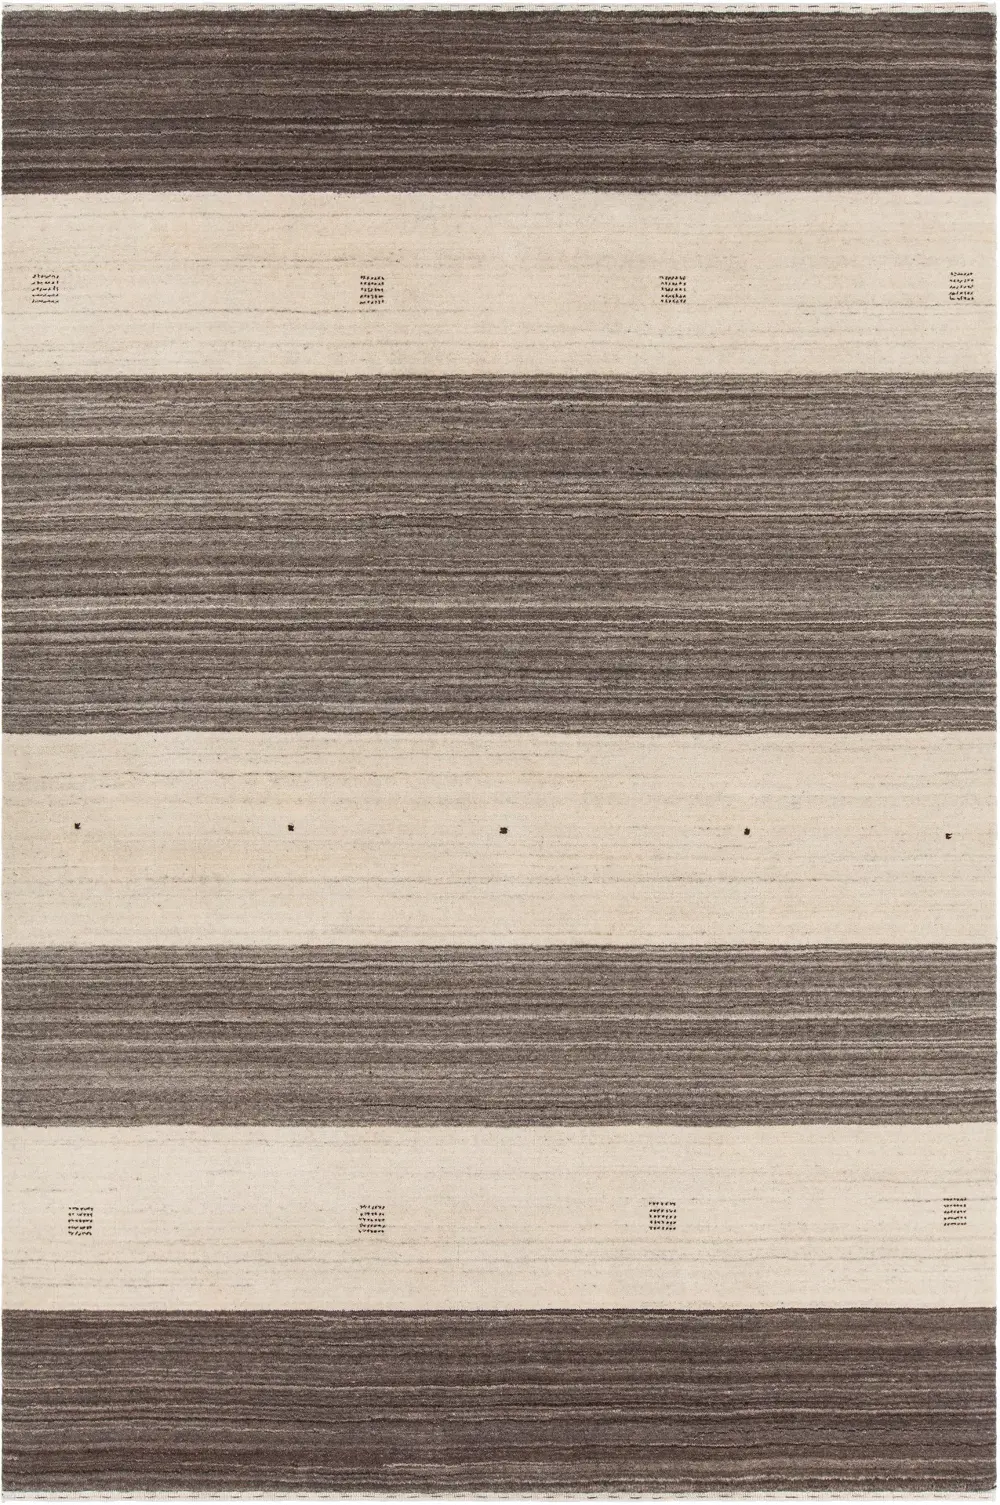 8 x 10 Large Wide Striped Brown and Beige Area Rug - Elantra-1